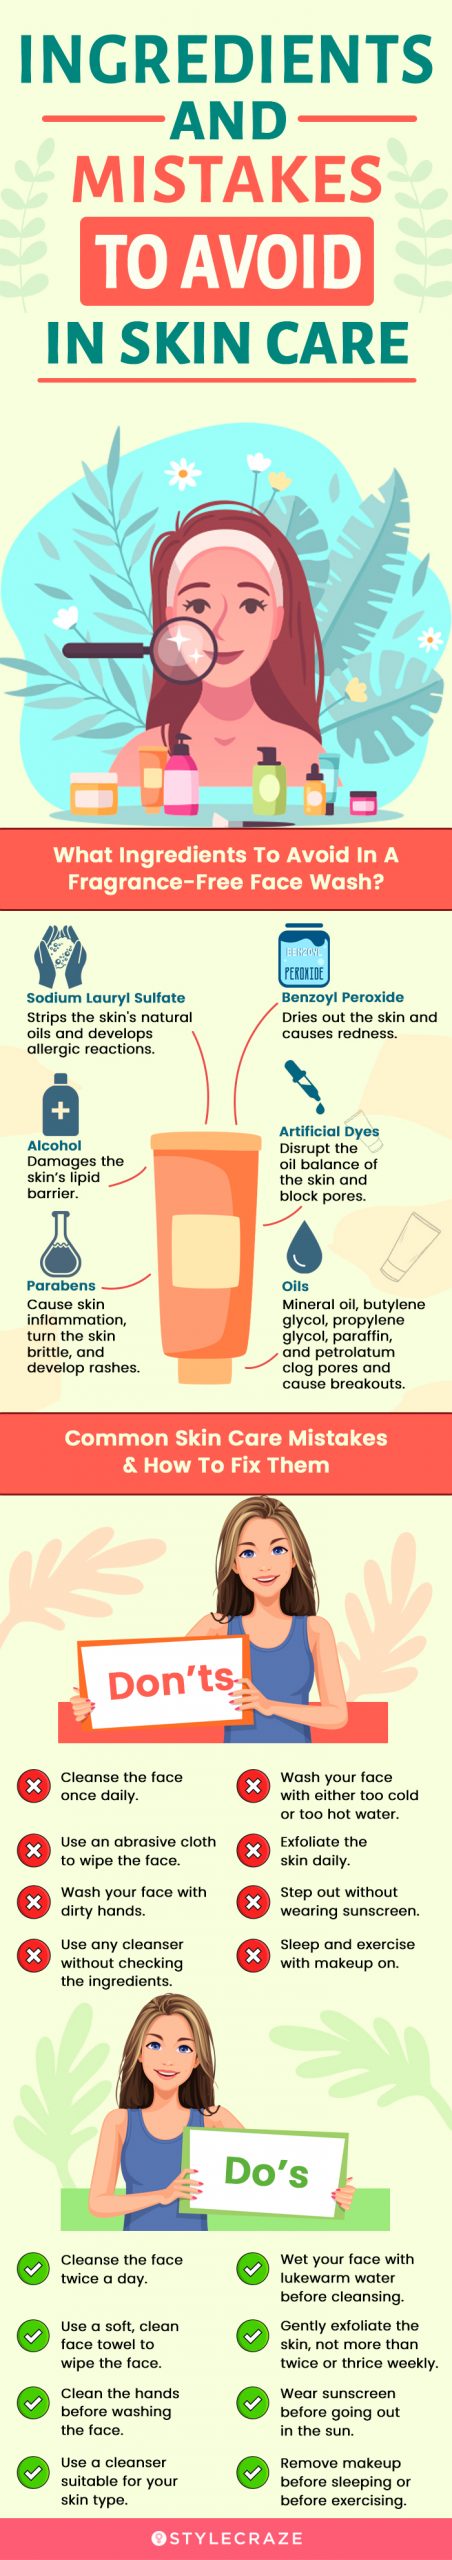 Ingredients & Mistakes To Avoid In Skin Care